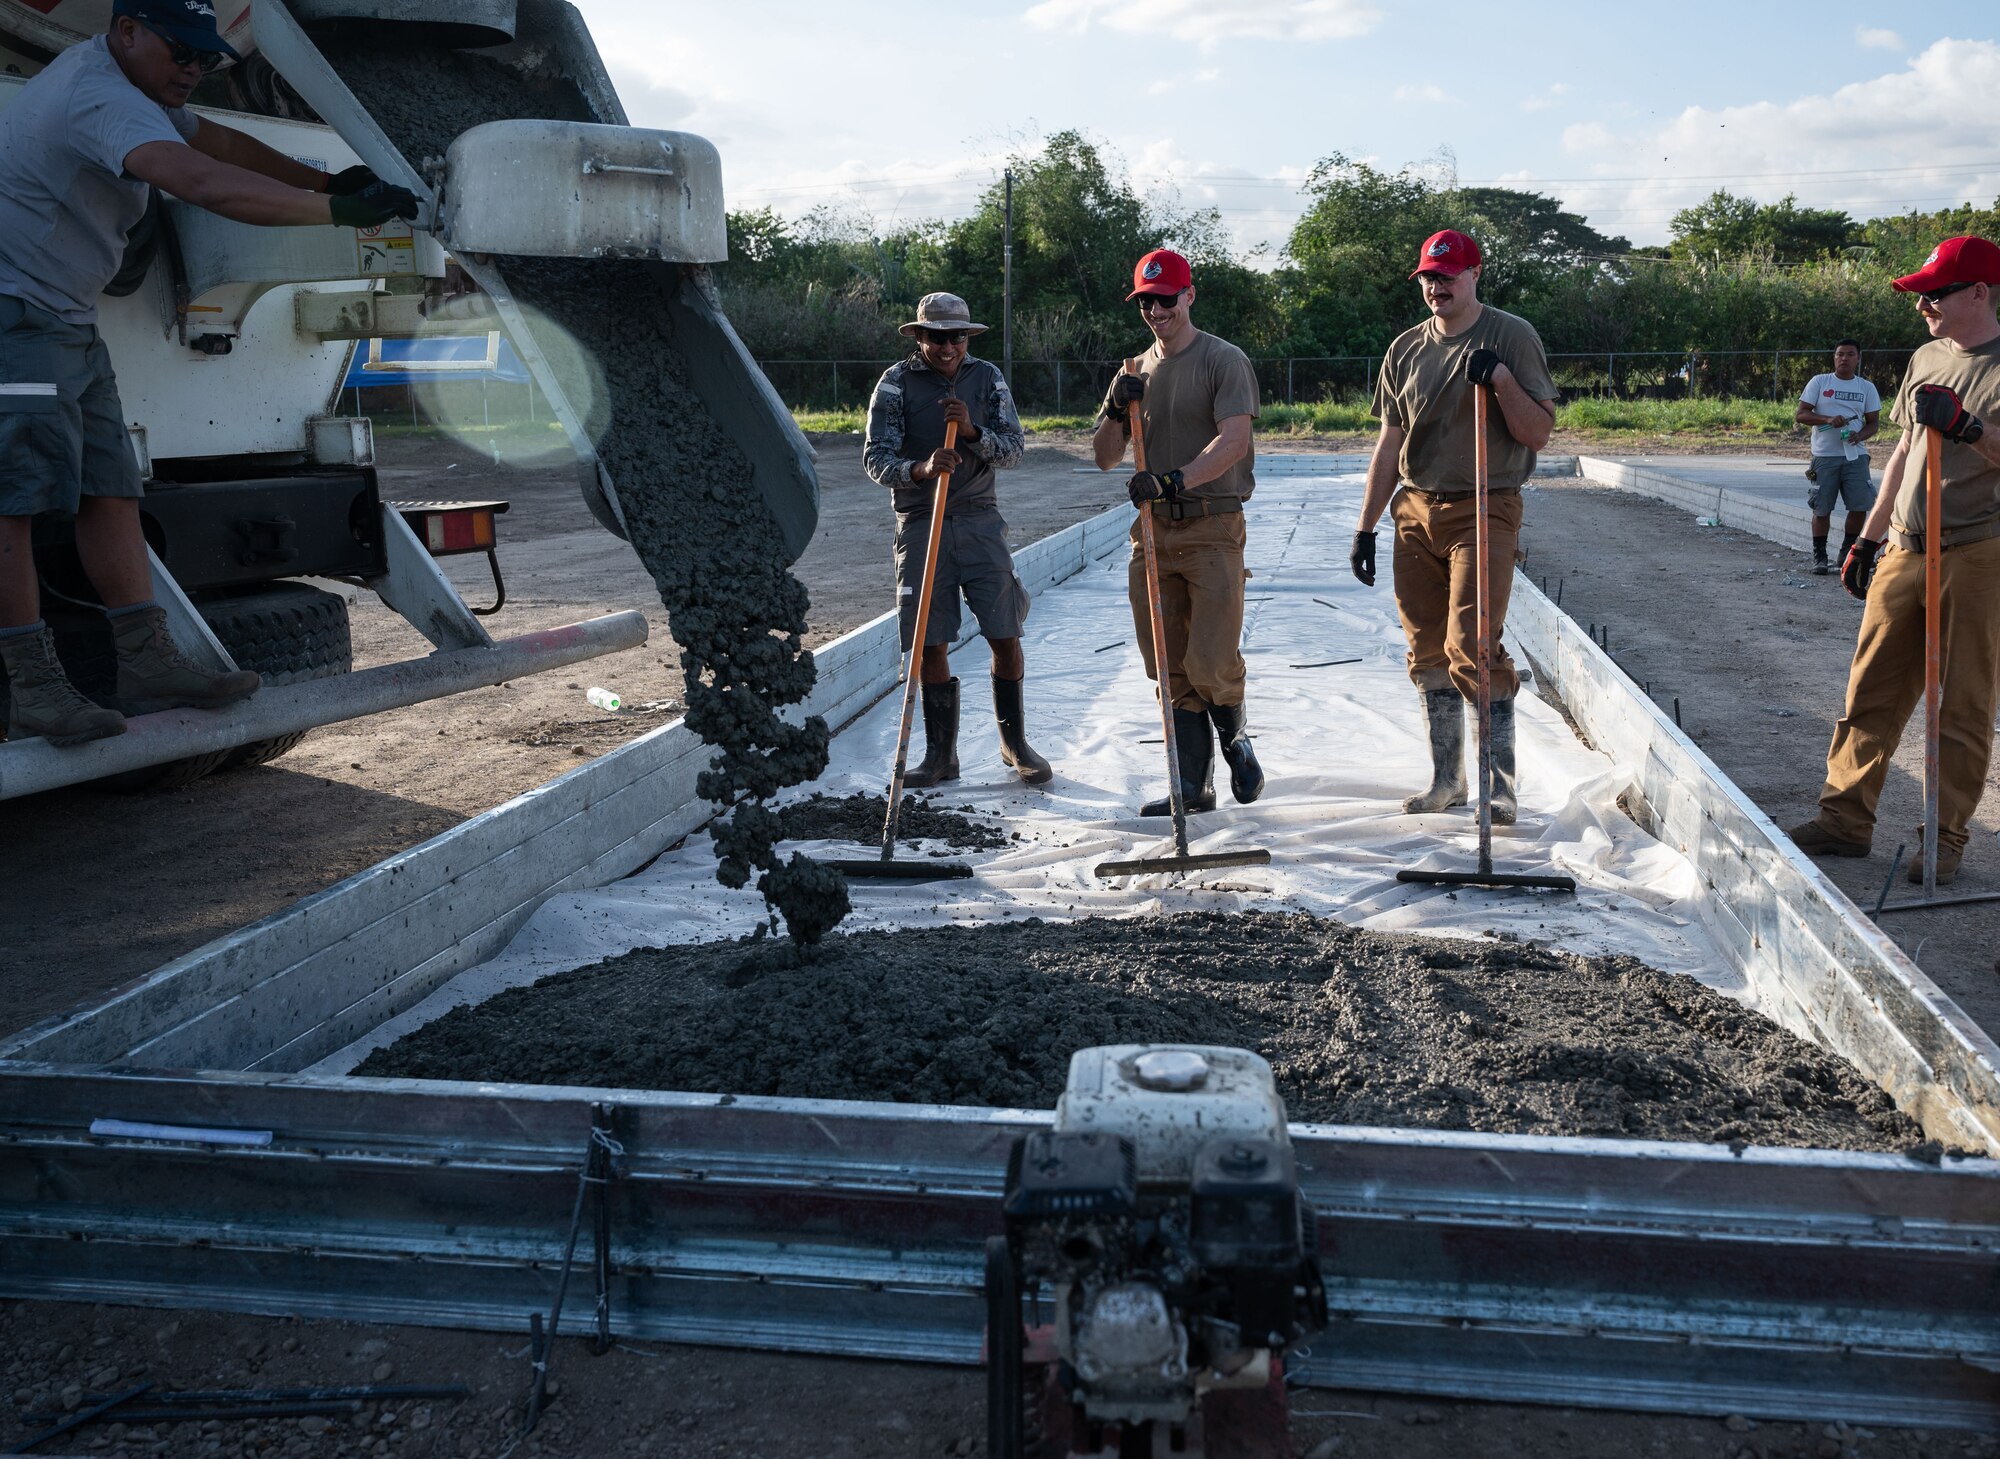 Airmen from the 819th RED HORSE Squadron out of Malmstrom Air Force Base, Montana, assist the Philippine Air Force in pouring concrete as part of a Field Training Event at Basa Air Base, Philippines, January 25, 2023. While the Airmen from the 819th were in the Philippines to pour concrete, they learned much more from their counterparts on and off the job. They shared special moments with each other including promotions, birthdays, culture, cuisine, and language. (U.S. Air Force photo by Tech. Sgt. Hailey Haux)